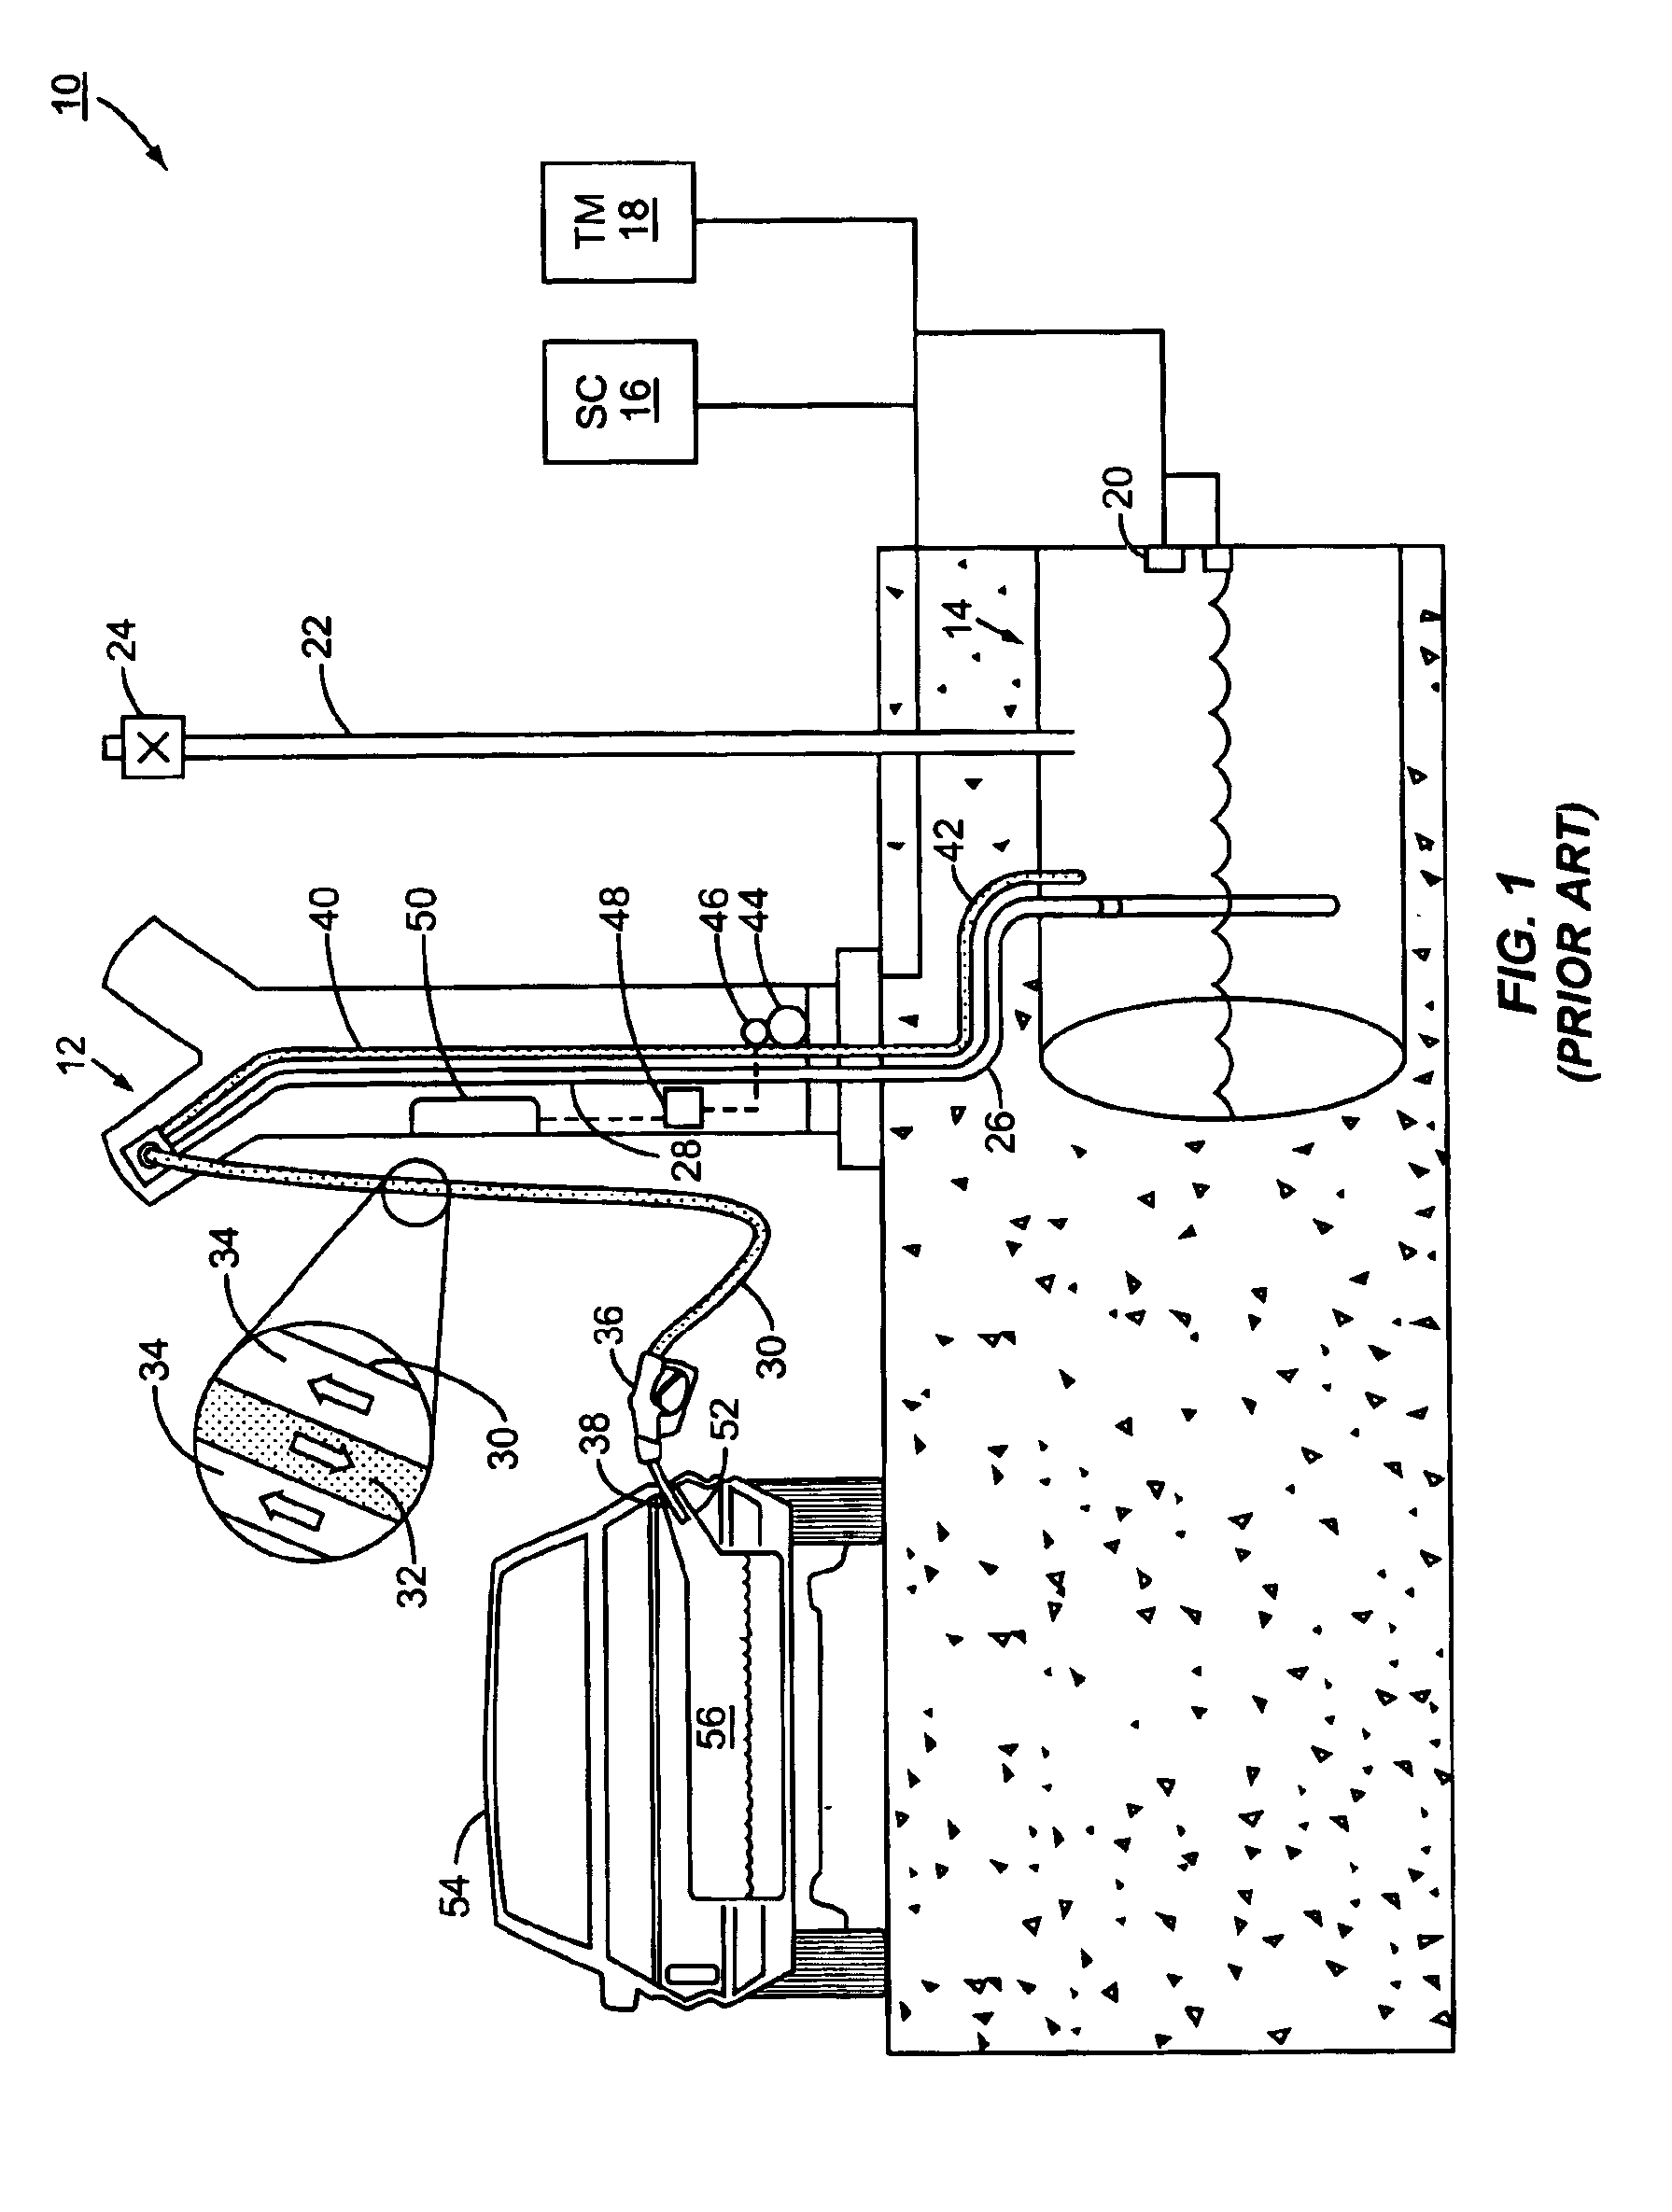 Vapor recovery system with ORVR compensation